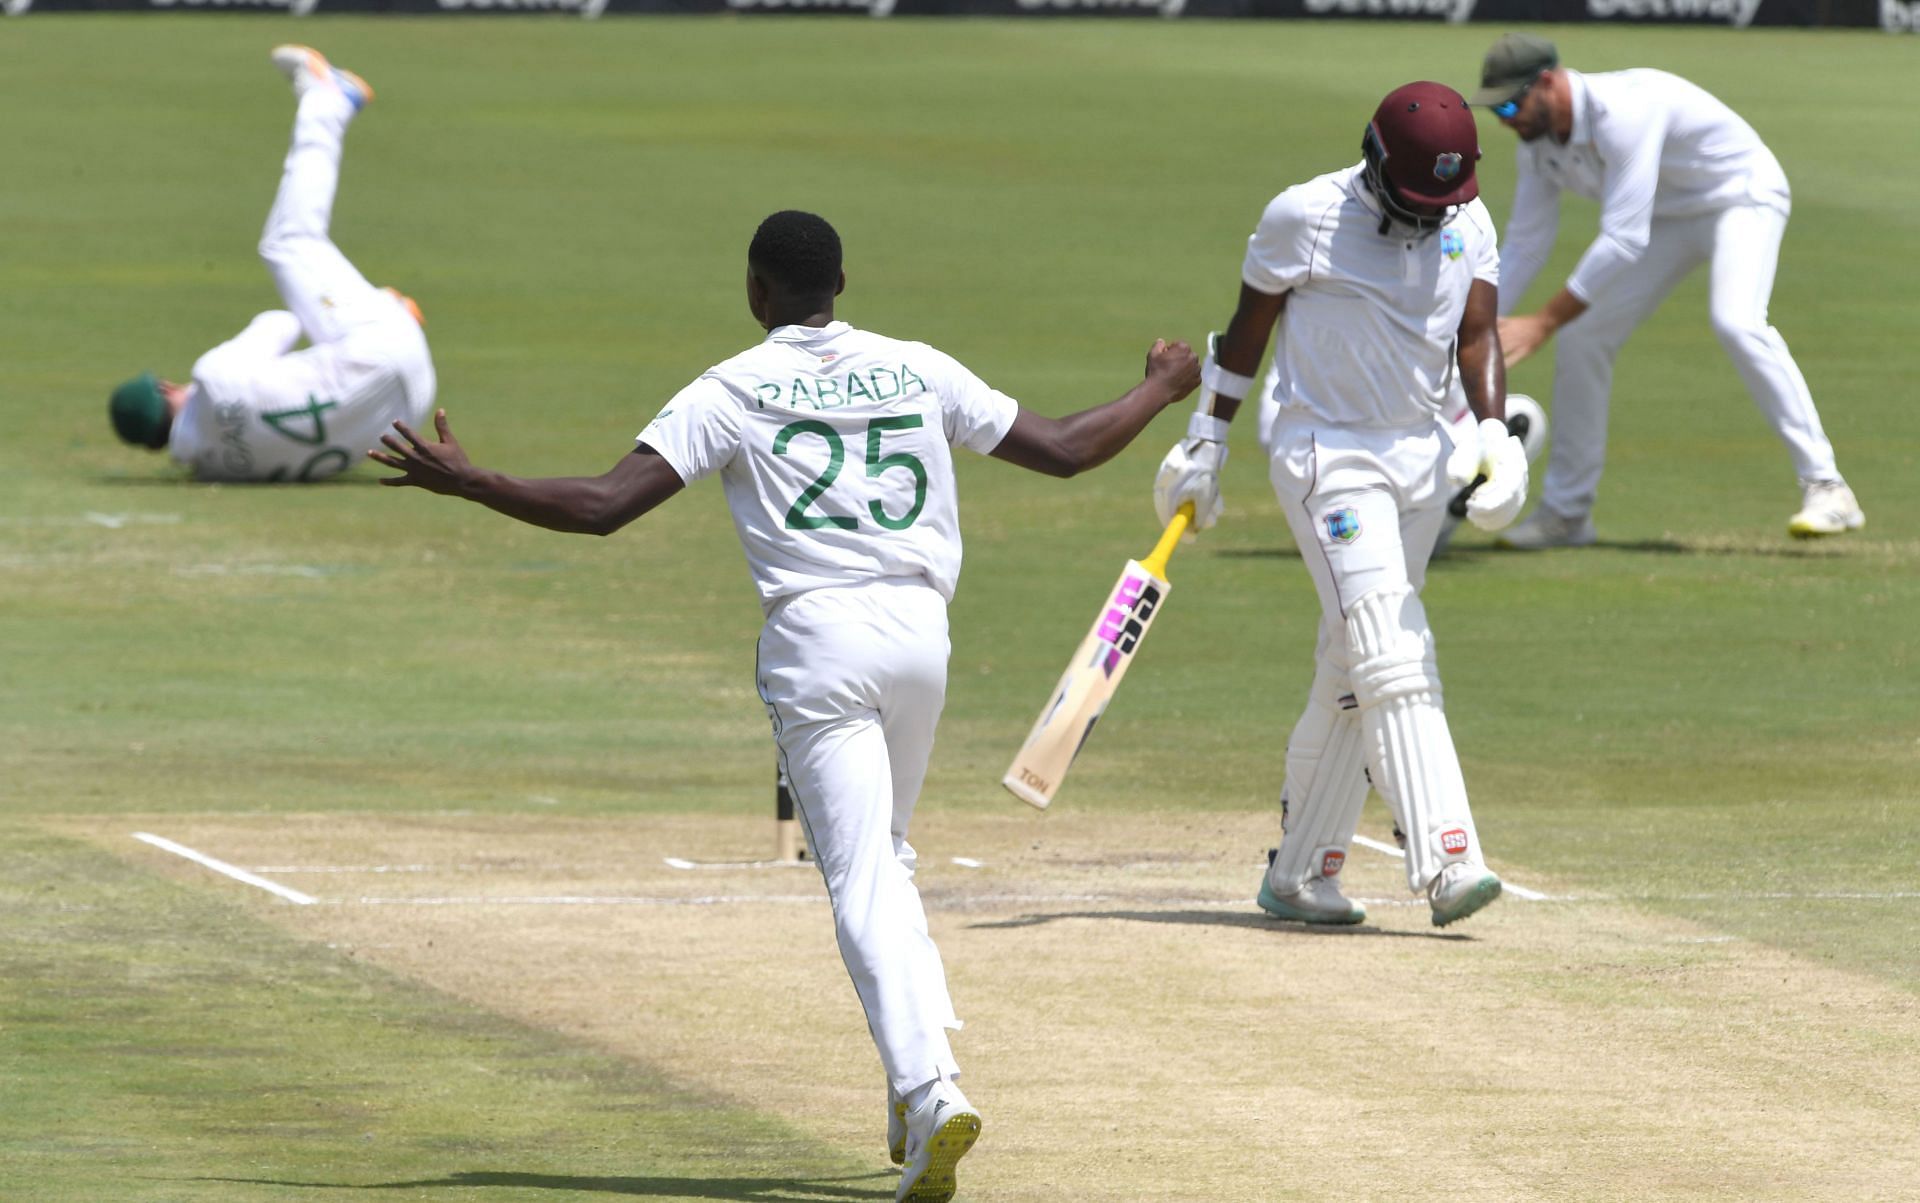 The West Indies have finished eighth in the last two WTC cycles.